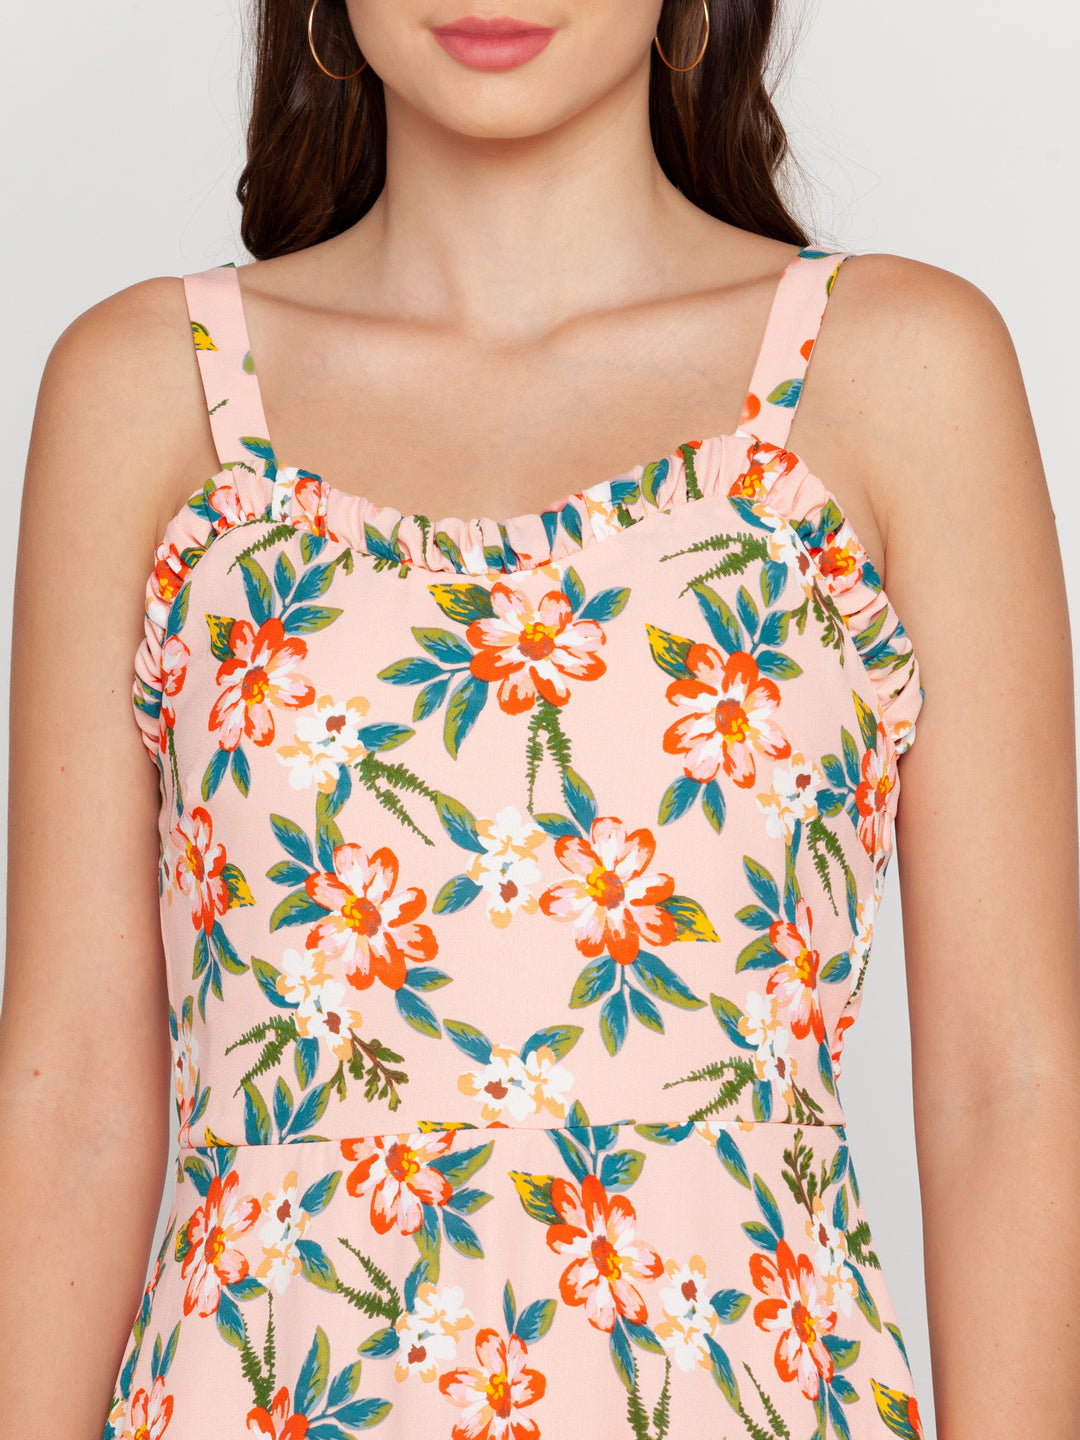 Peach Printed Strappy Maxi Dress For Women